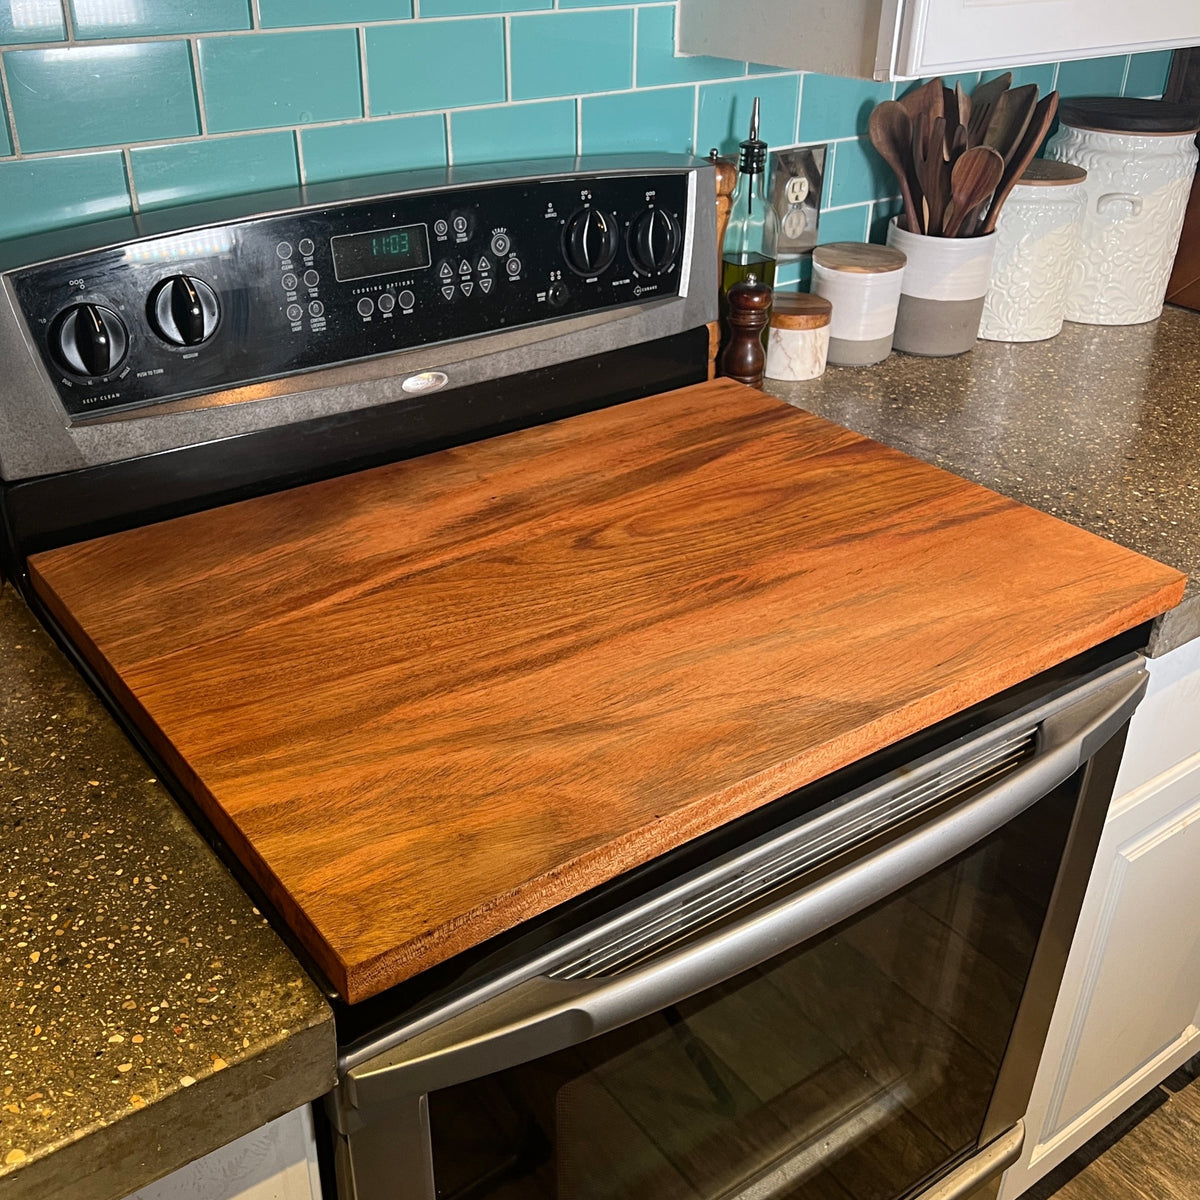 Custom Wood Stove Top Cover Oven Cover Walnut Noodle Board